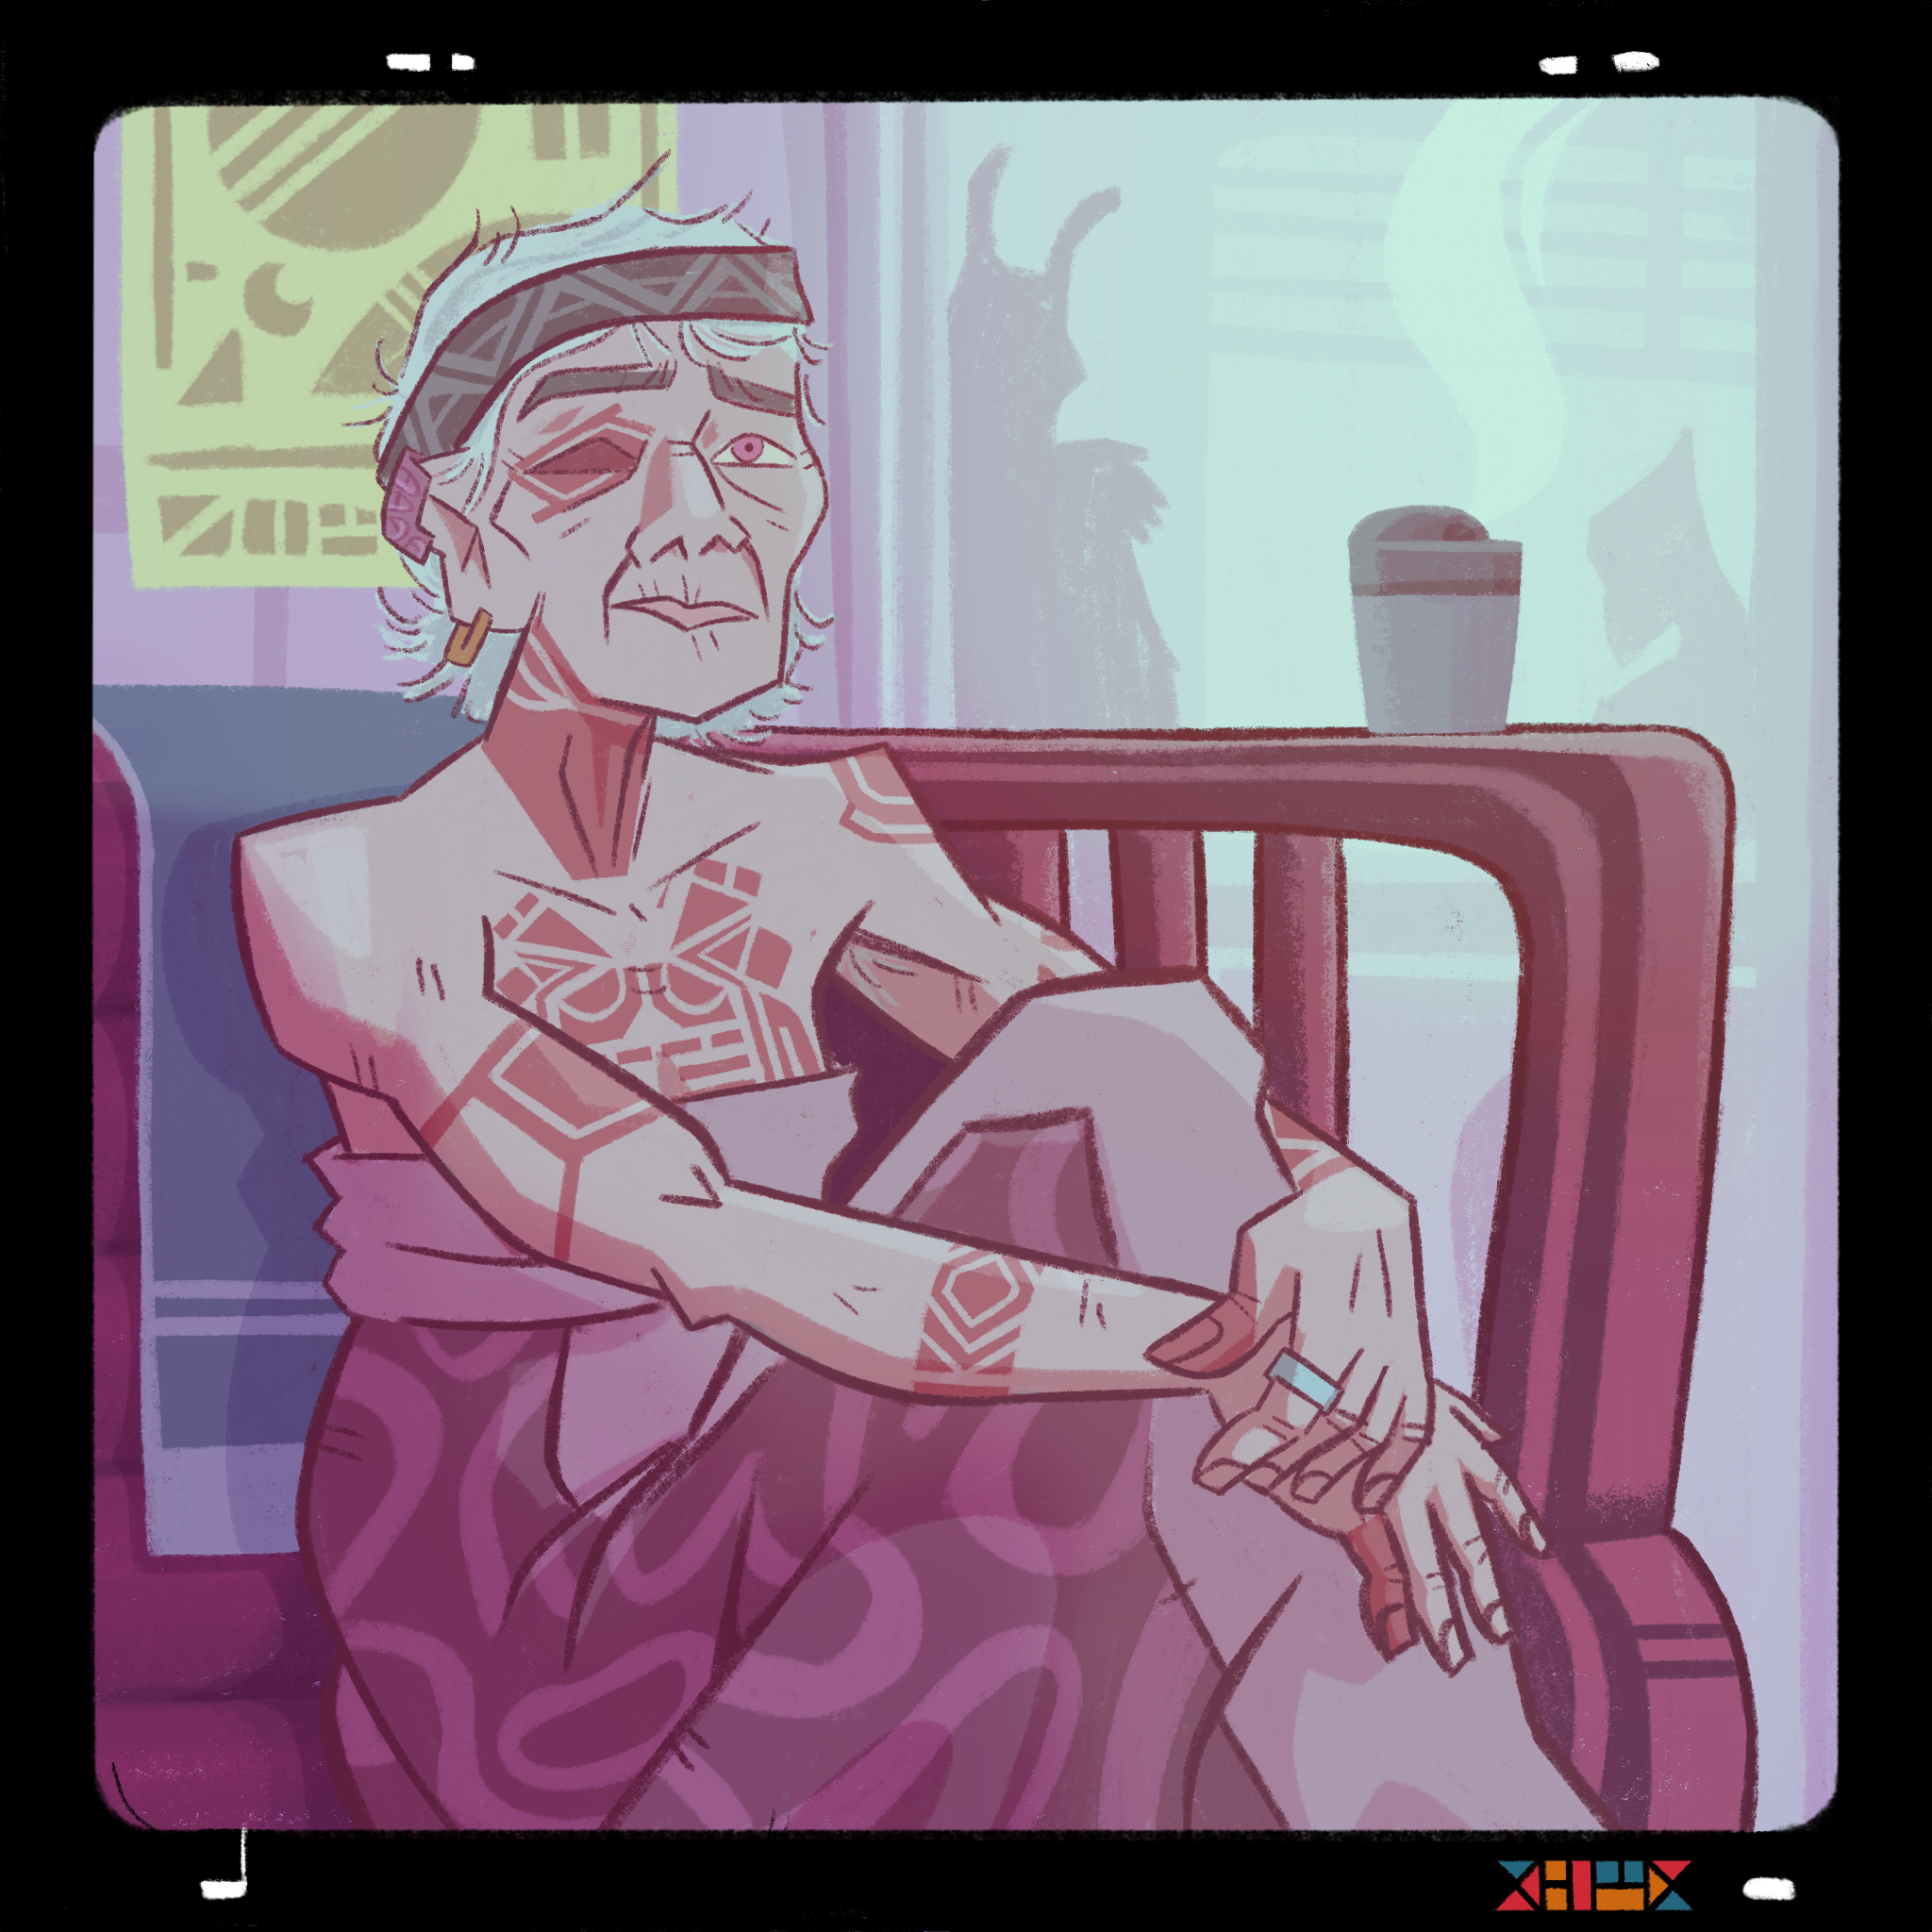 A digital drawing of an older human woman with tattoos on her neck, chest, arms and face, sitting in an armchair and looking at the camera.